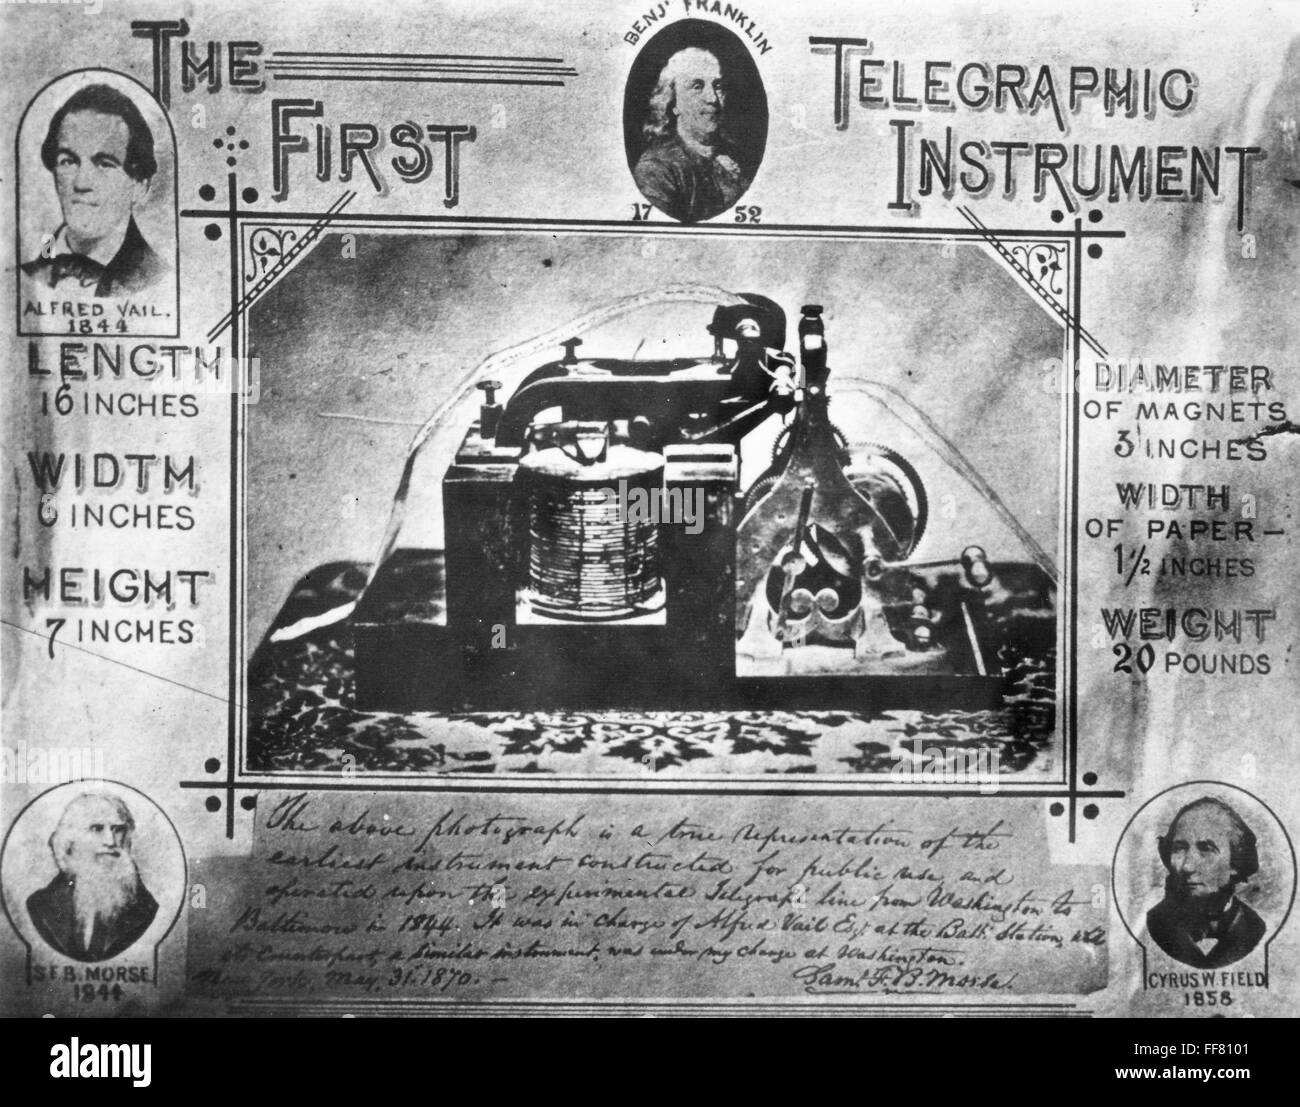 Telegraphy Ninstrument Used By Samuel Fb Morse To Send His First Telegraph Message From 8874